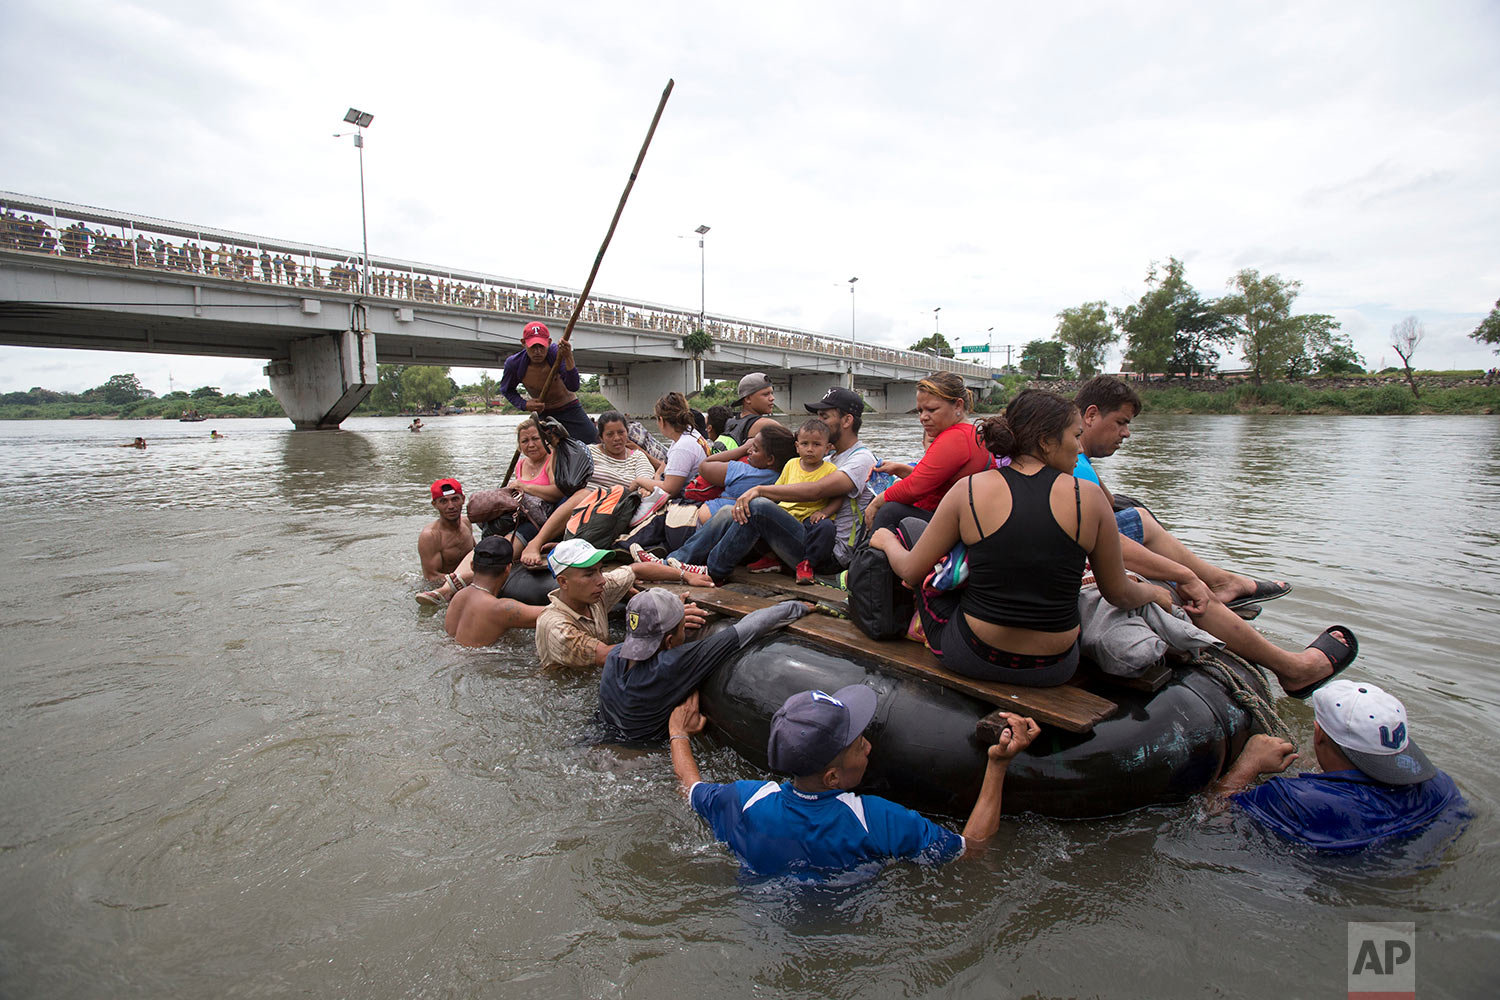  A group of Central American migrants cross the Suchiate River aboard a raft made out of tractor inner tubes and wooden planks, on the the border between Guatemala and Mexico, in Ciudad Hidalgo, Mexico, Saturday, Oct. 20, 2018. (AP Photo/Moises Casti